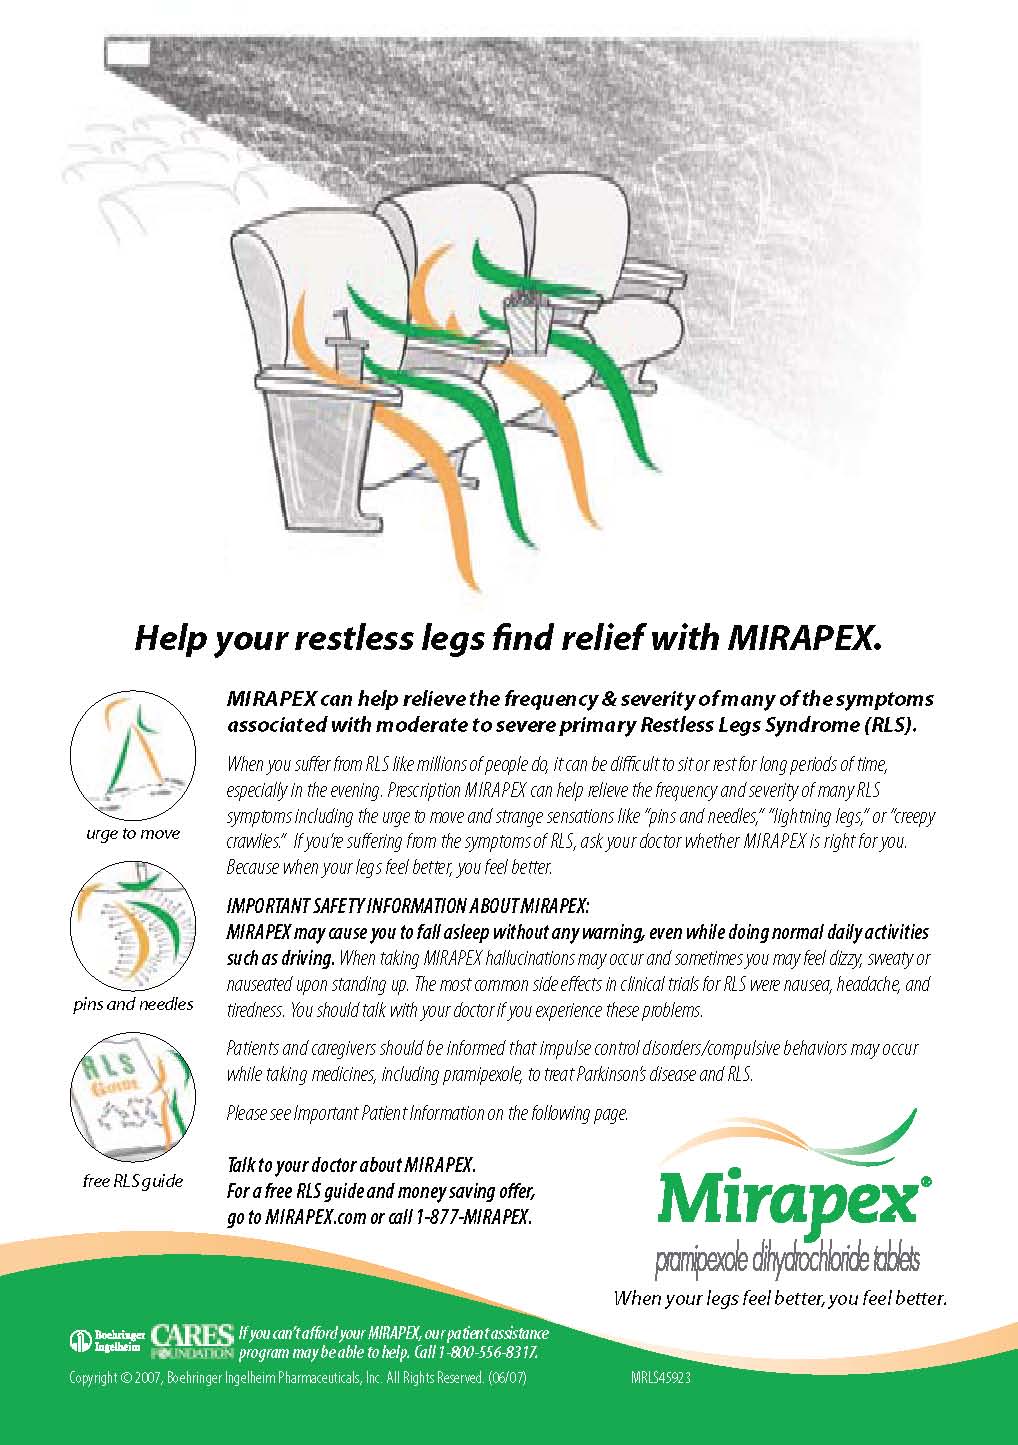 Mirapex campaign gets kick from research